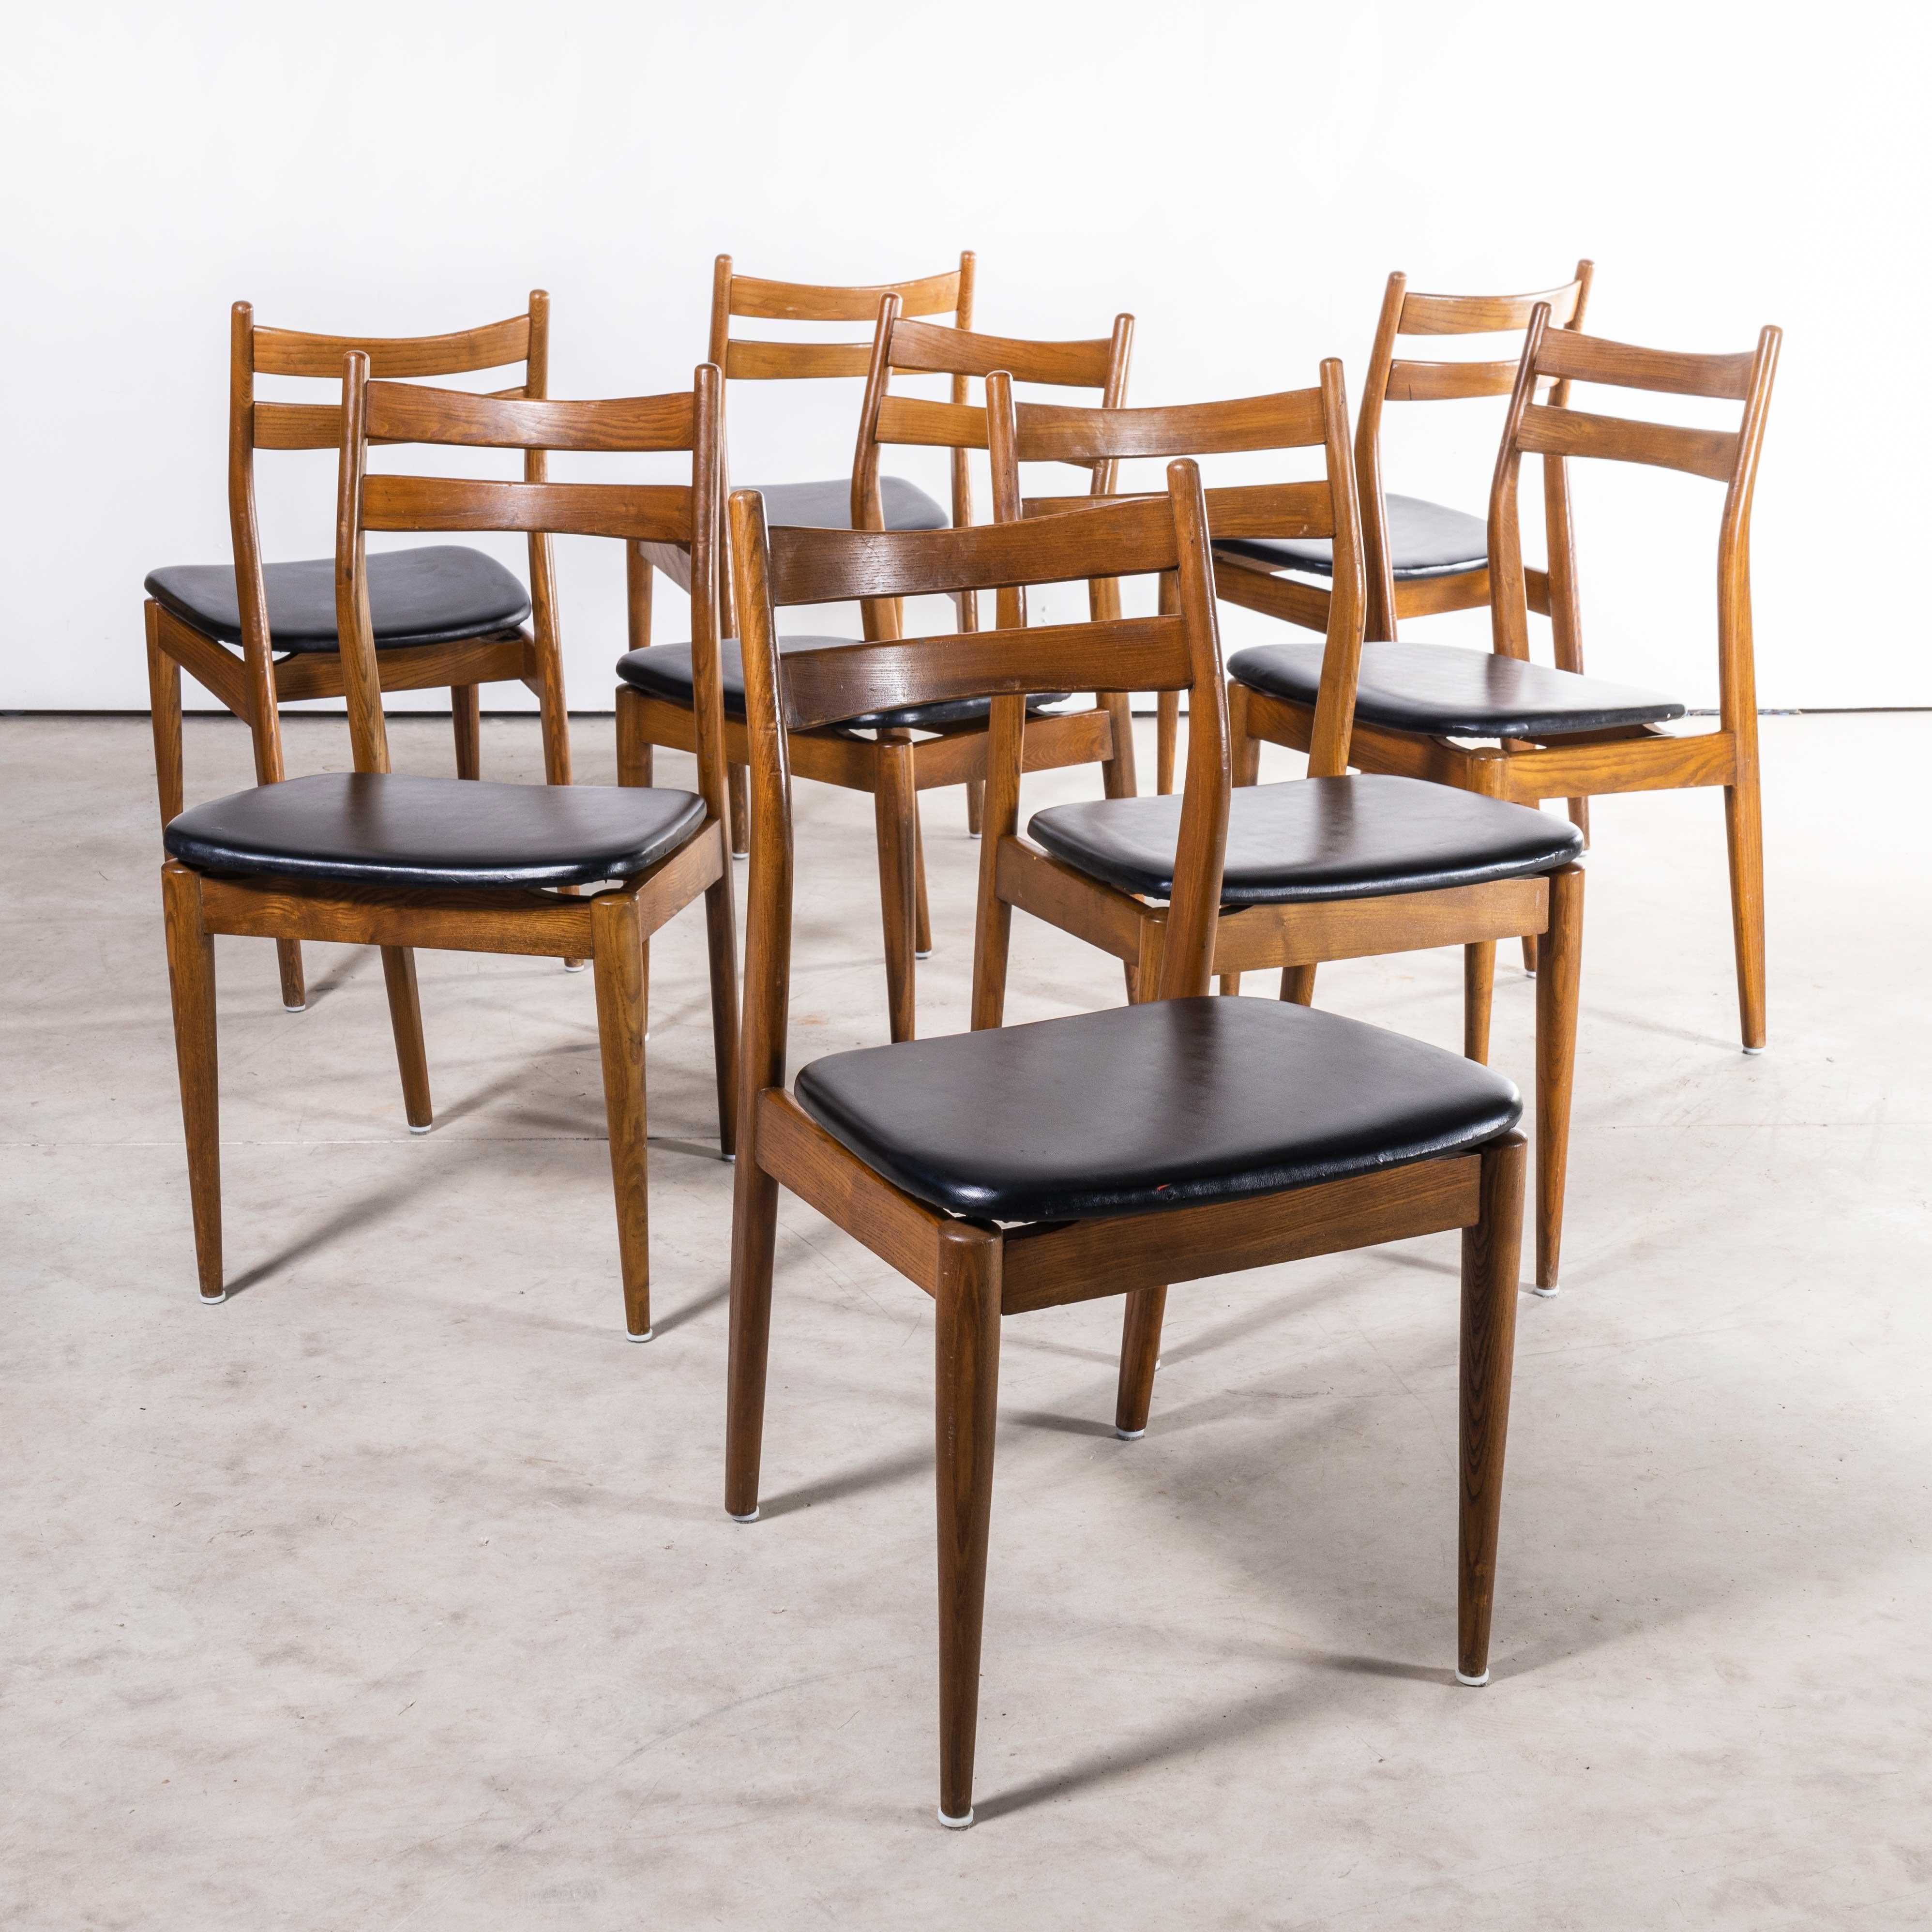 1960s Midcentury dining chairs – set of eight
1960s Midcentury dining chairs – set of eight. Classic midcentury design dining chairs made in Germany in solid sapele wood. Graceful frames with turned legs and back supports and comfortable two rail